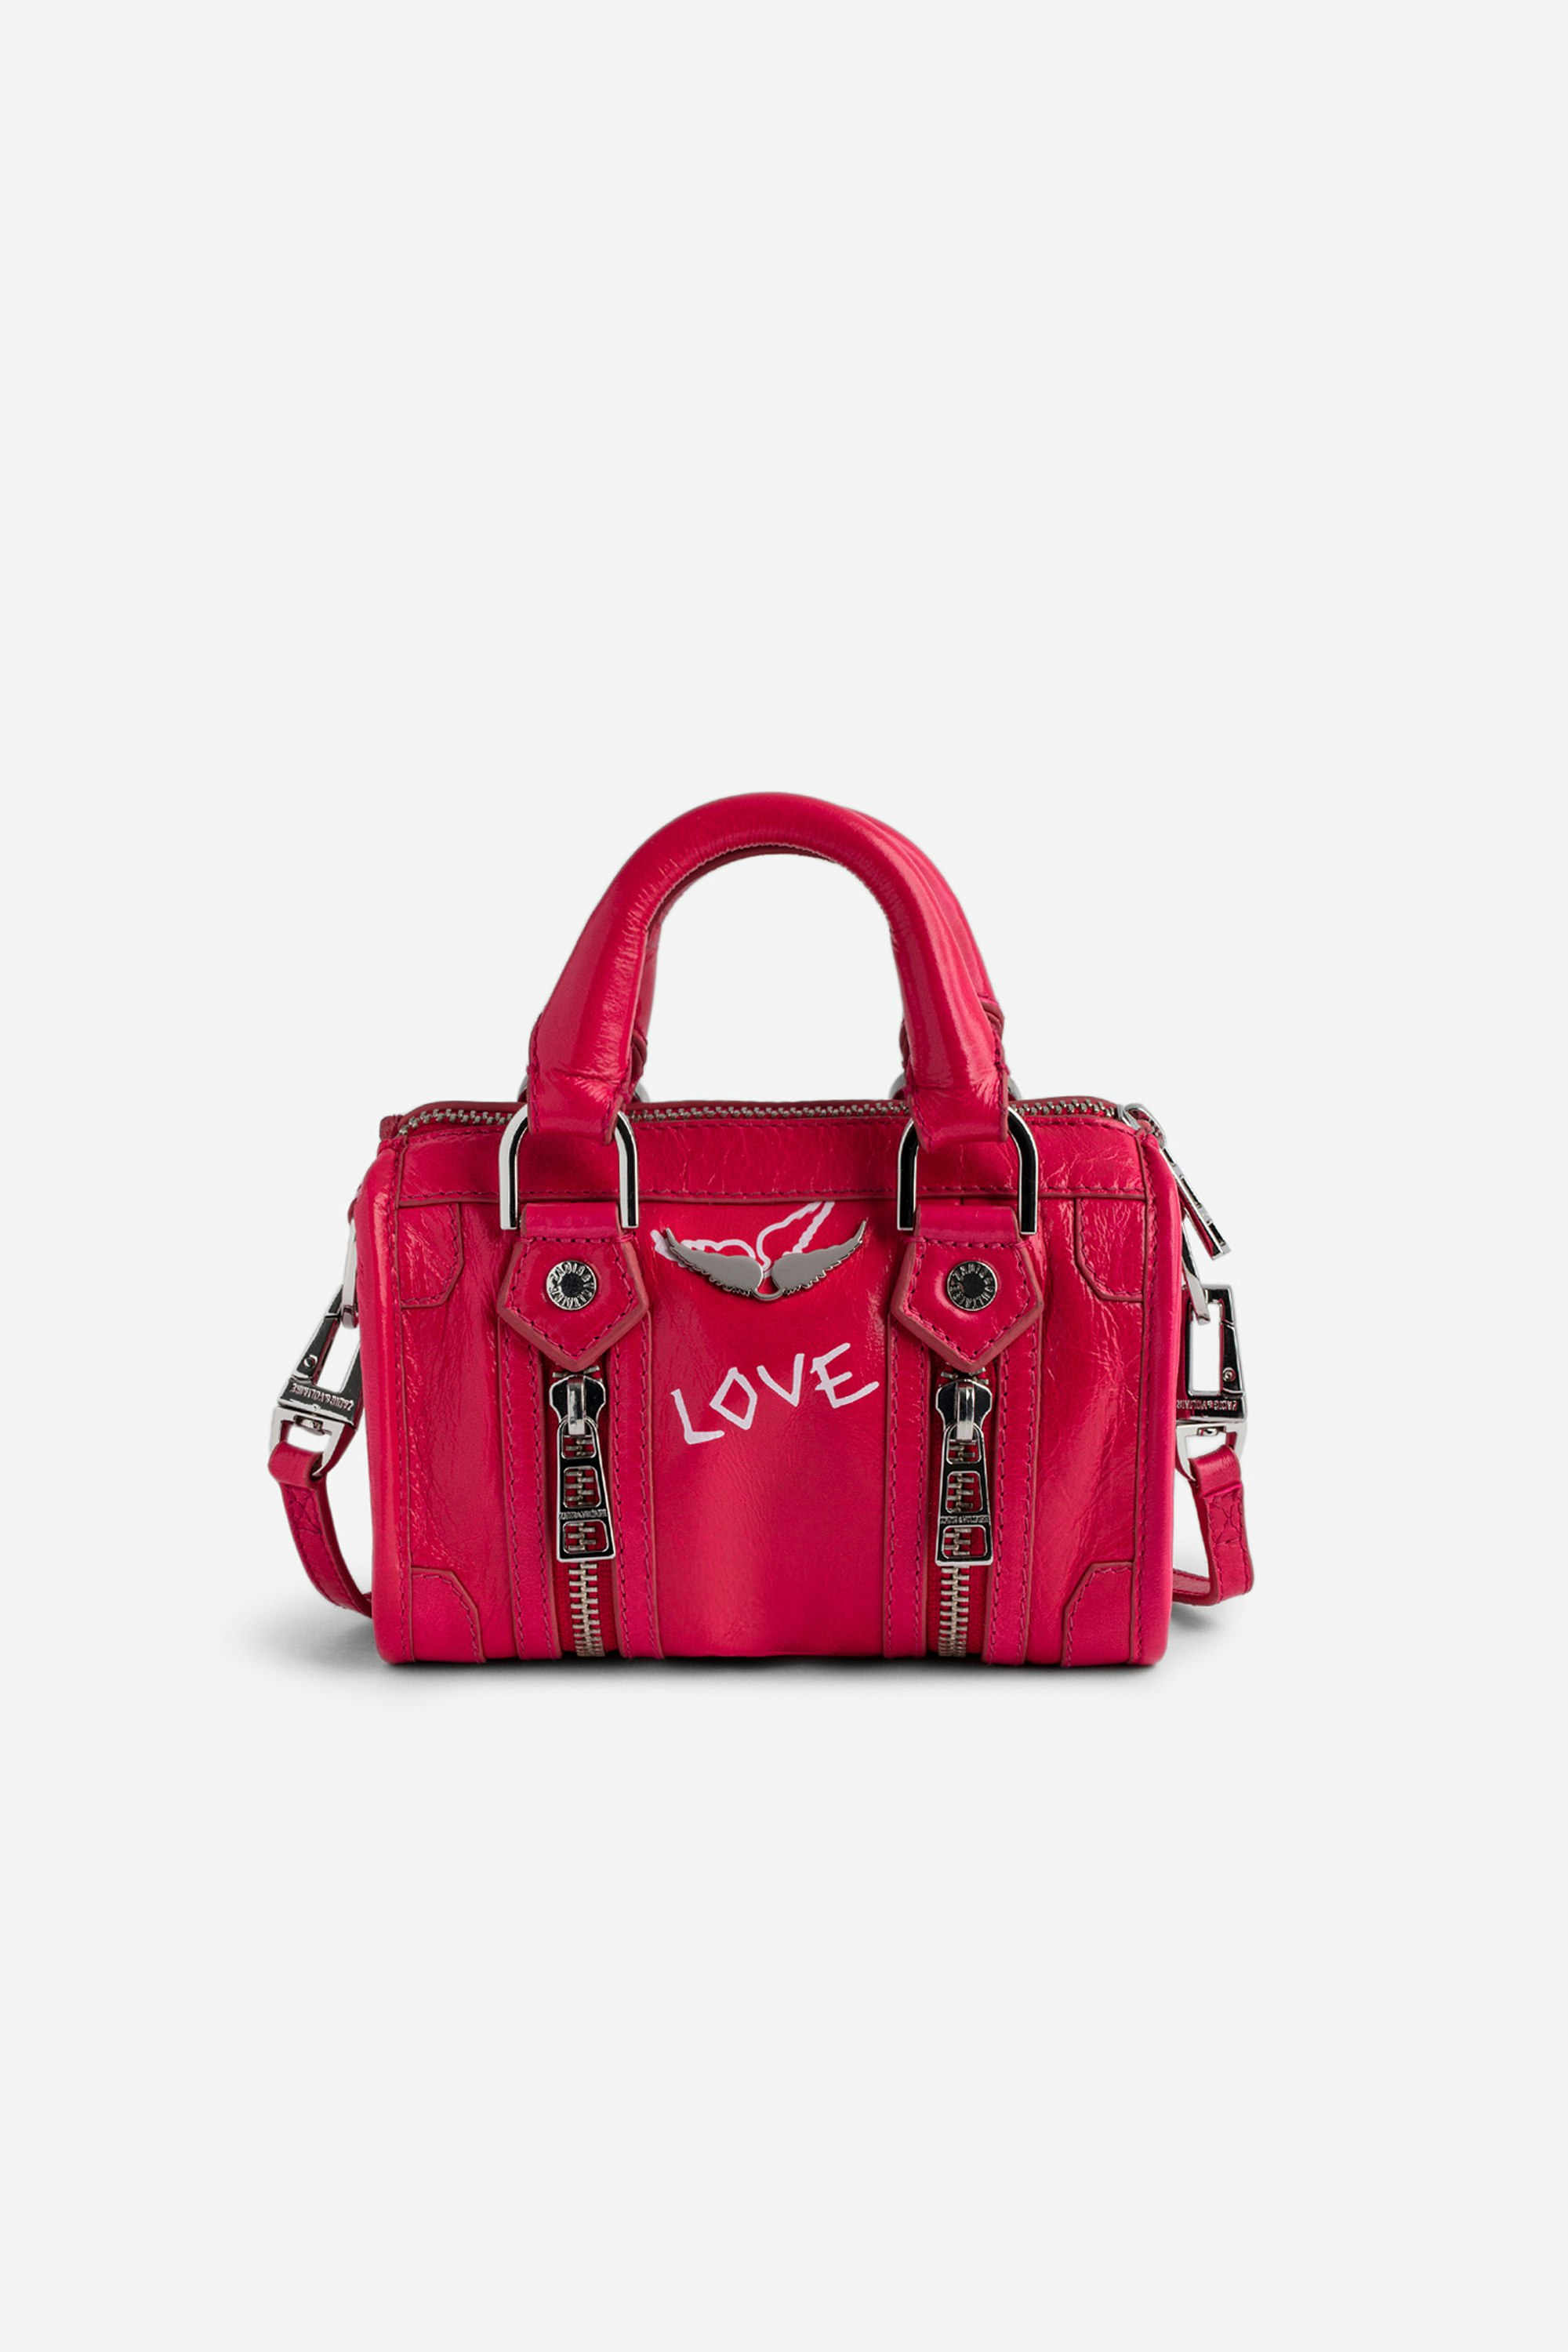 Sunny Nano #2 Tag Bag - Women’s pink vintage-effect patent leather Nano bag with handle and shoulder strap with wings and “Love” tags.